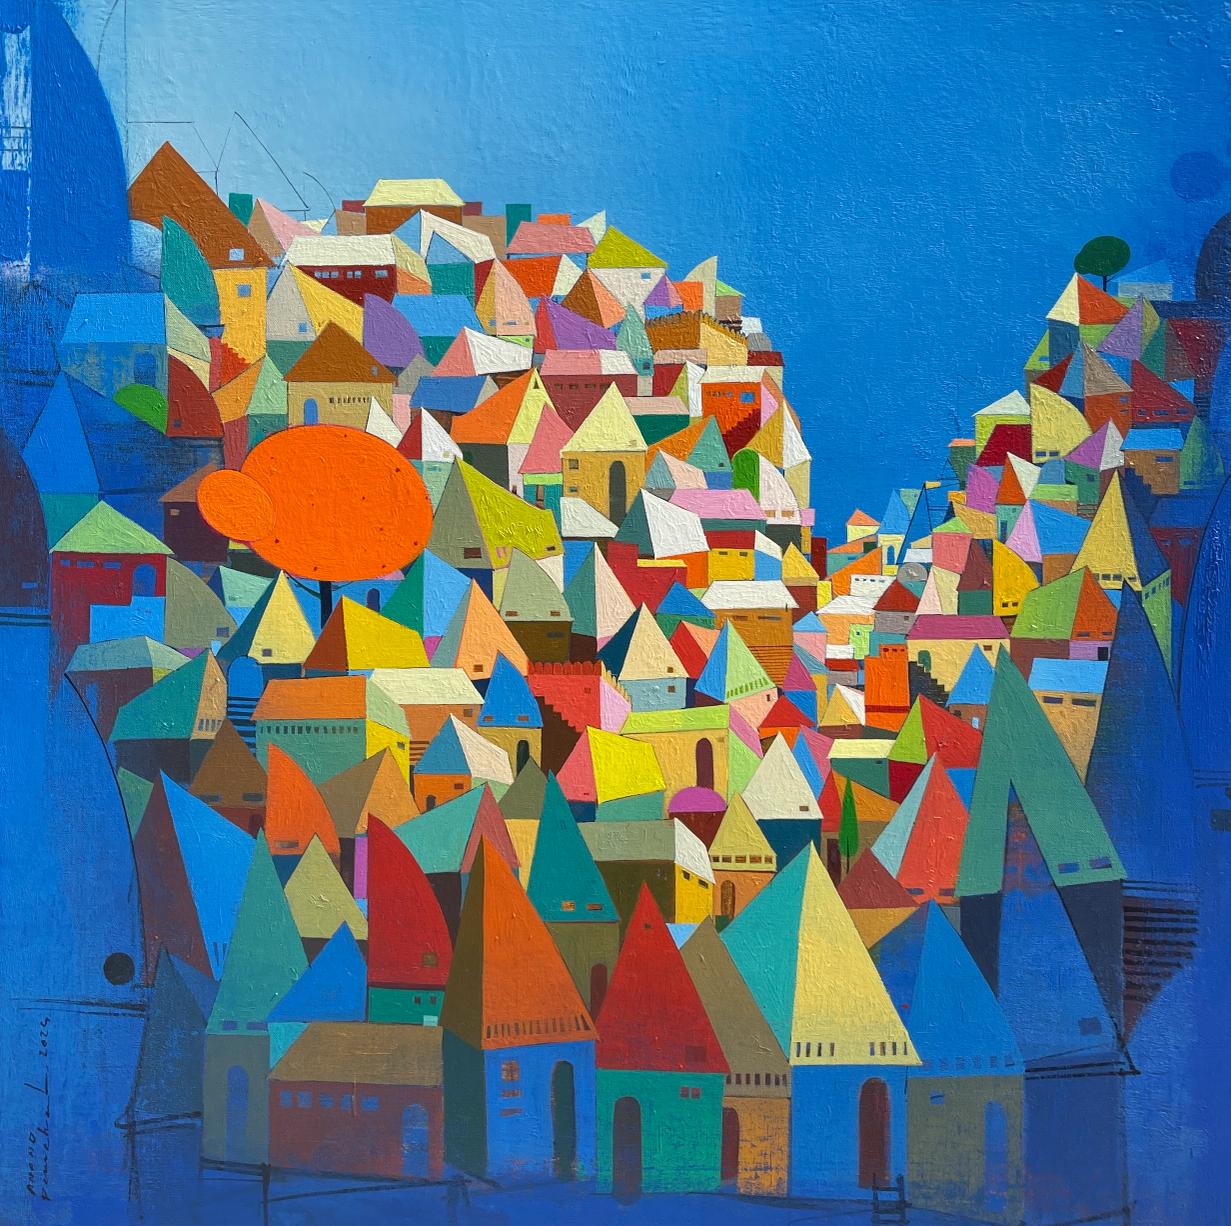 Vibrant Villagescape in primary color palette with blue skies and shadows dominating the work by ANand Panchal